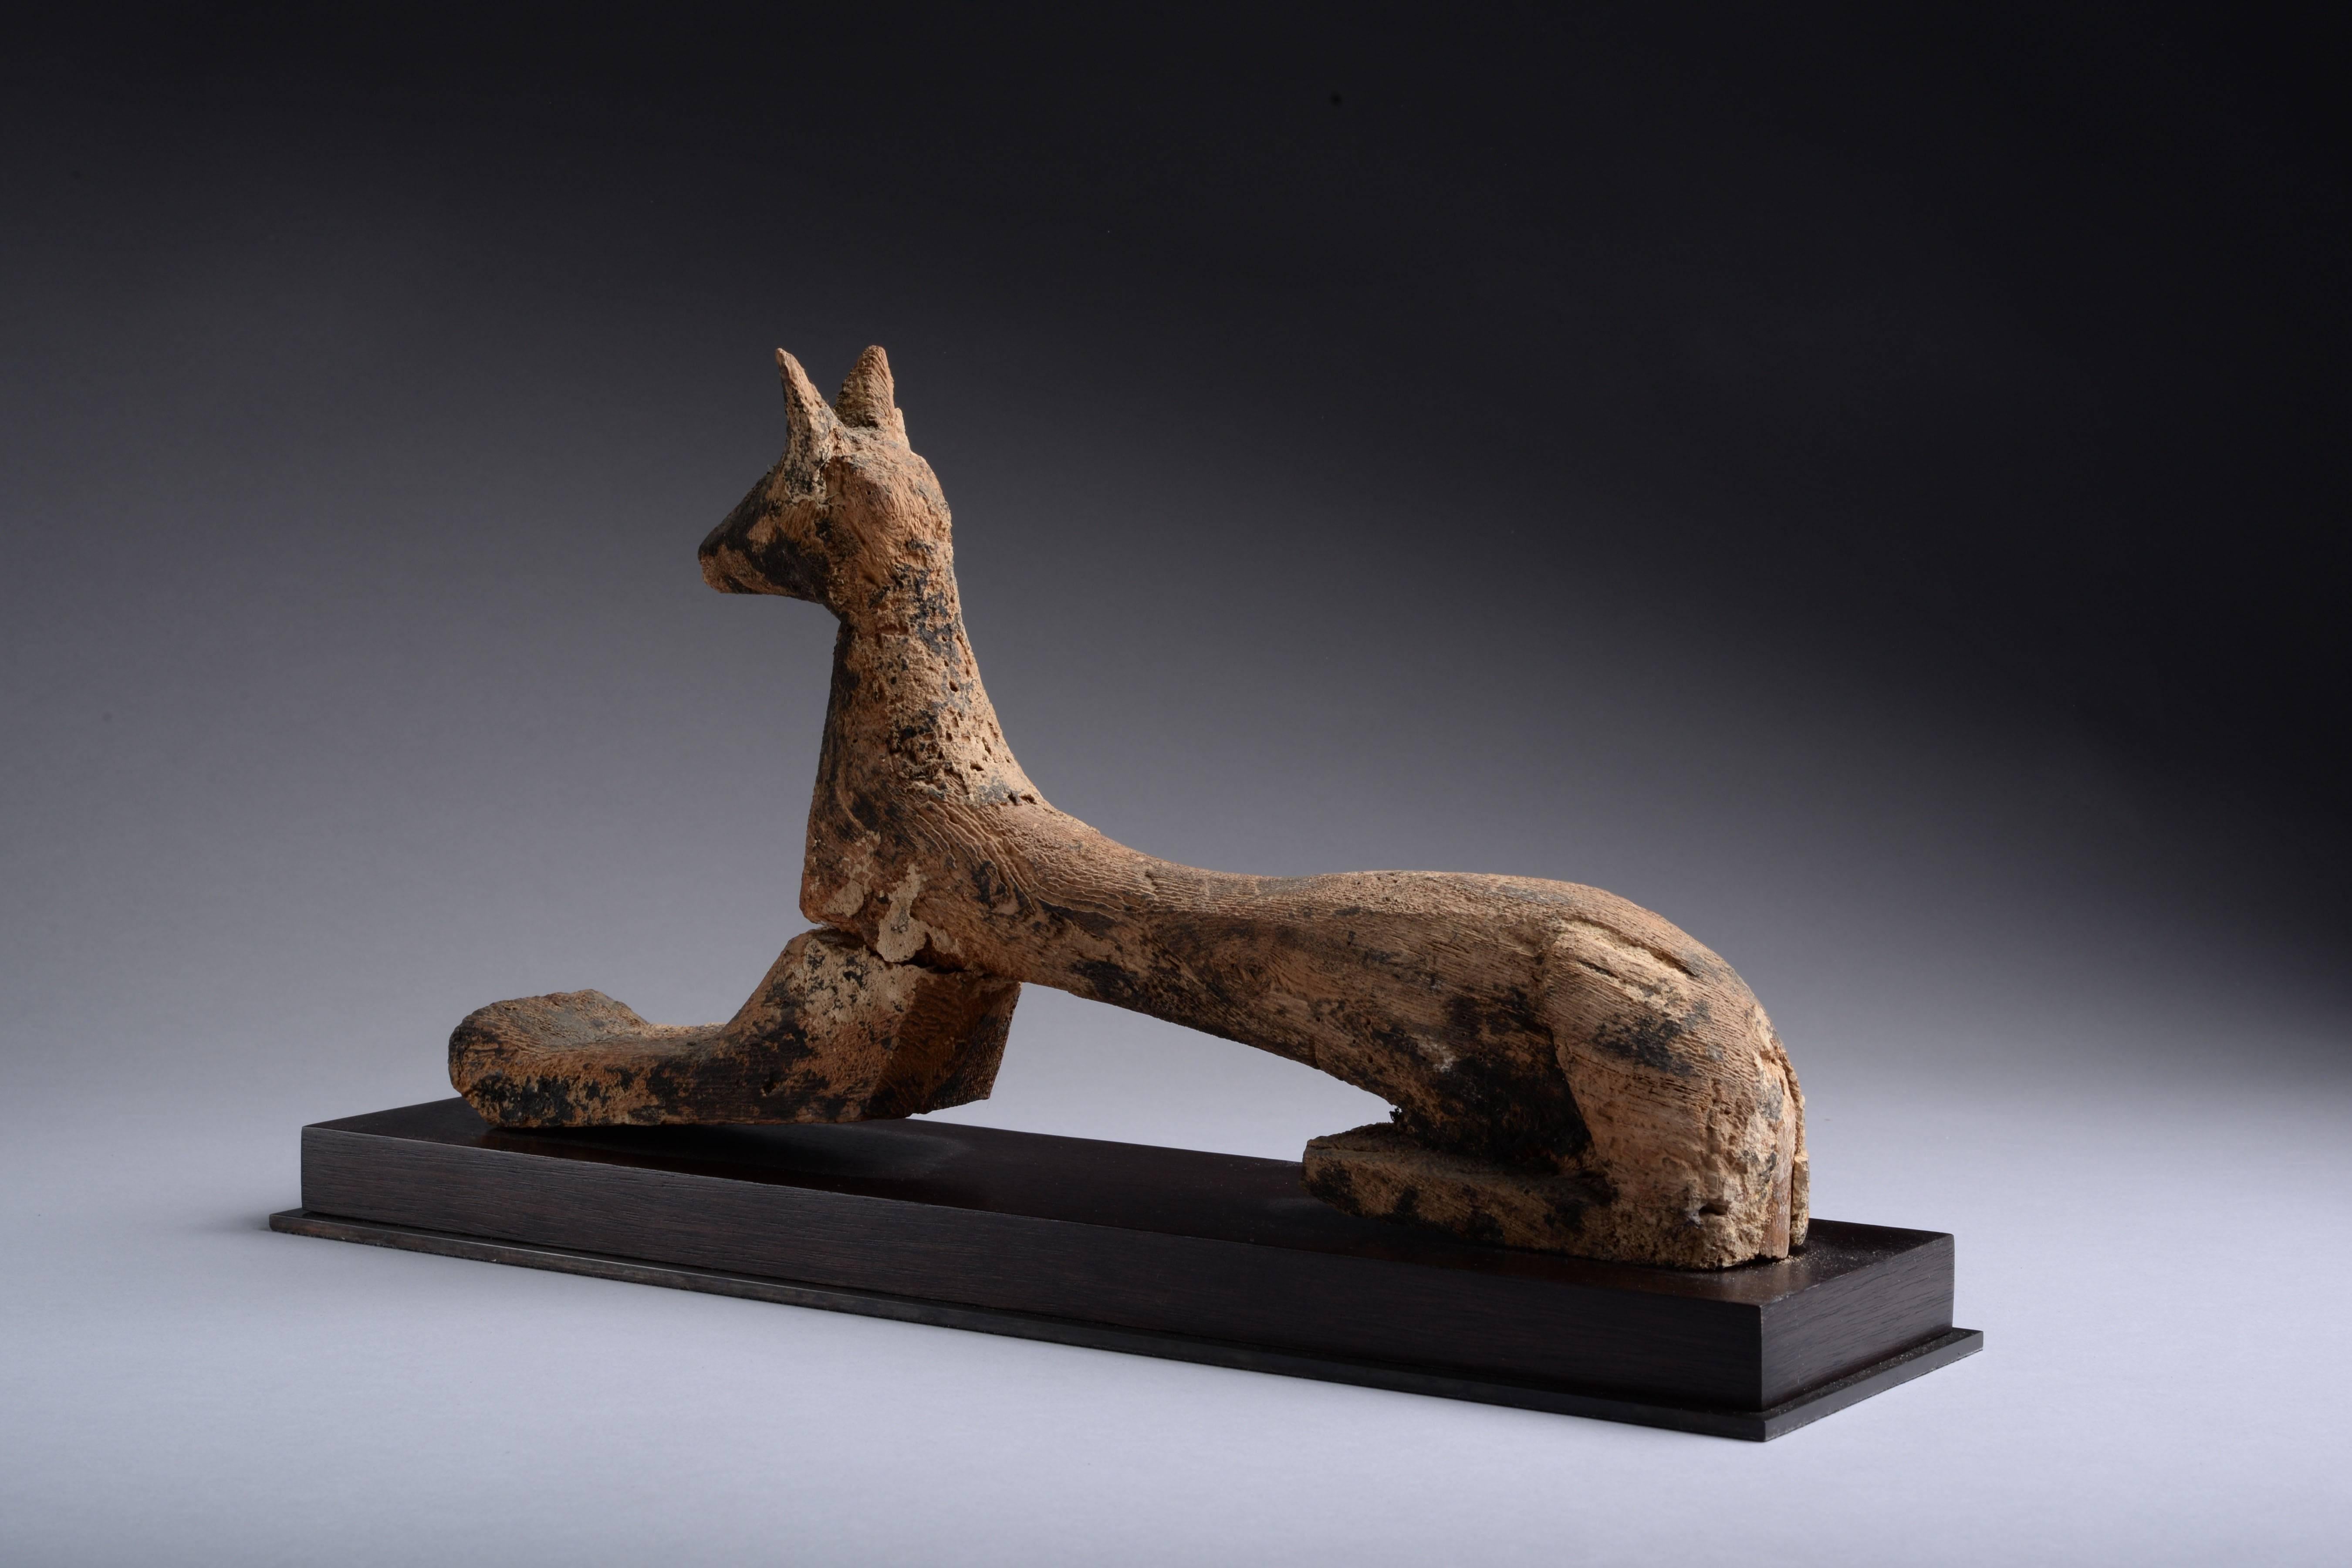 An ancient Egyptian wooden statue of the jackal god, Anubis. Dating to approximately 700 BC.

Now weathered and reduced to the essence of form, this ancient sculpture has a beautiful aesthetic. Depicting the god of the afterlife, in a typical